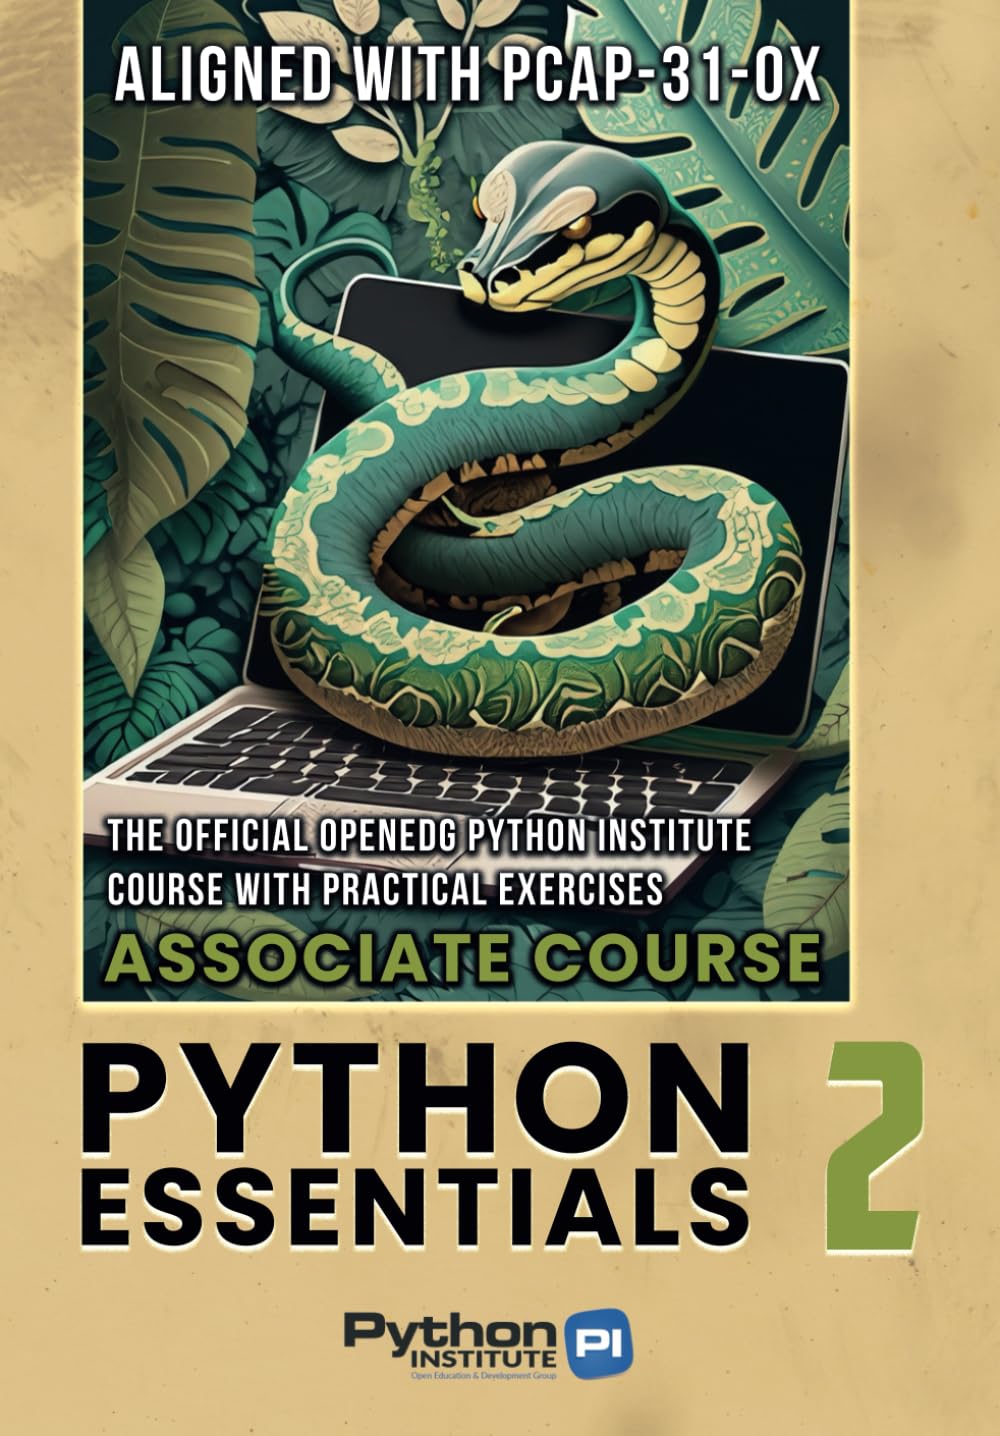 Python Essentials 2: The Official OpenEDG Python Institute Course Book – Aligned with PCAP-31-0x Certification Exam